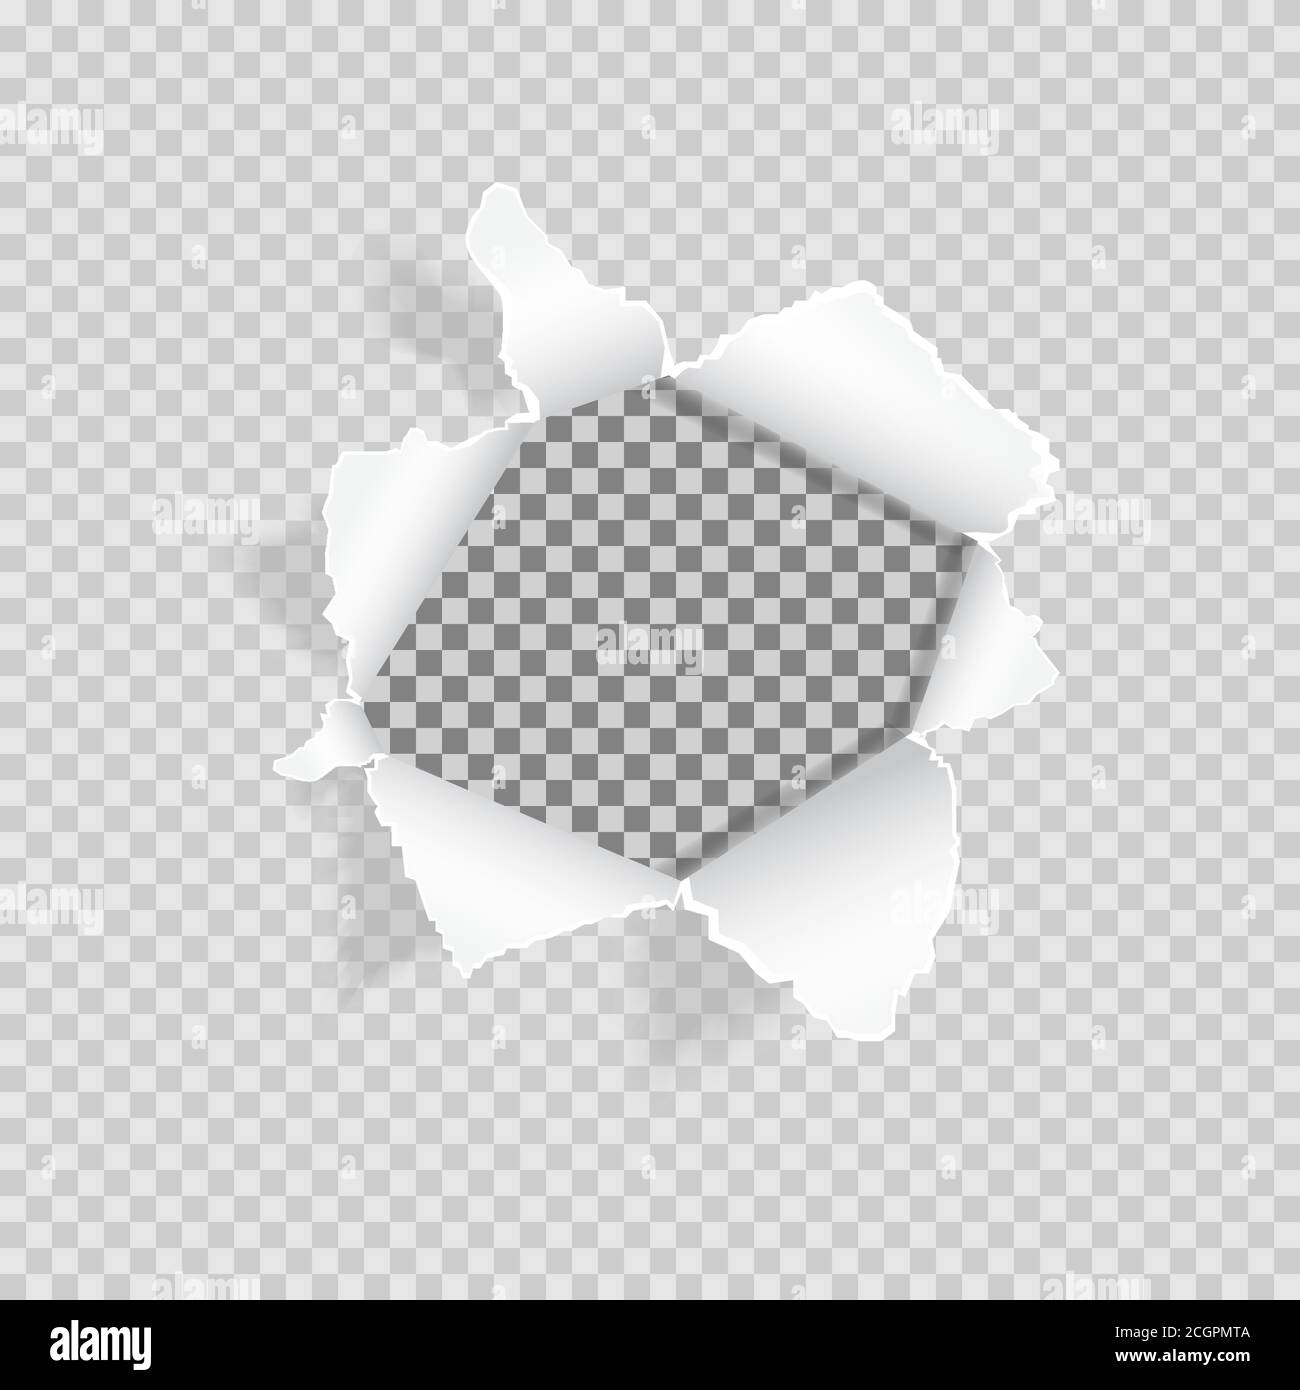 Torn paper on transparent background. Realistic ripped hole in the sheet of paper. Paper with ripped edges and space for text. Design for web, print Stock Vector